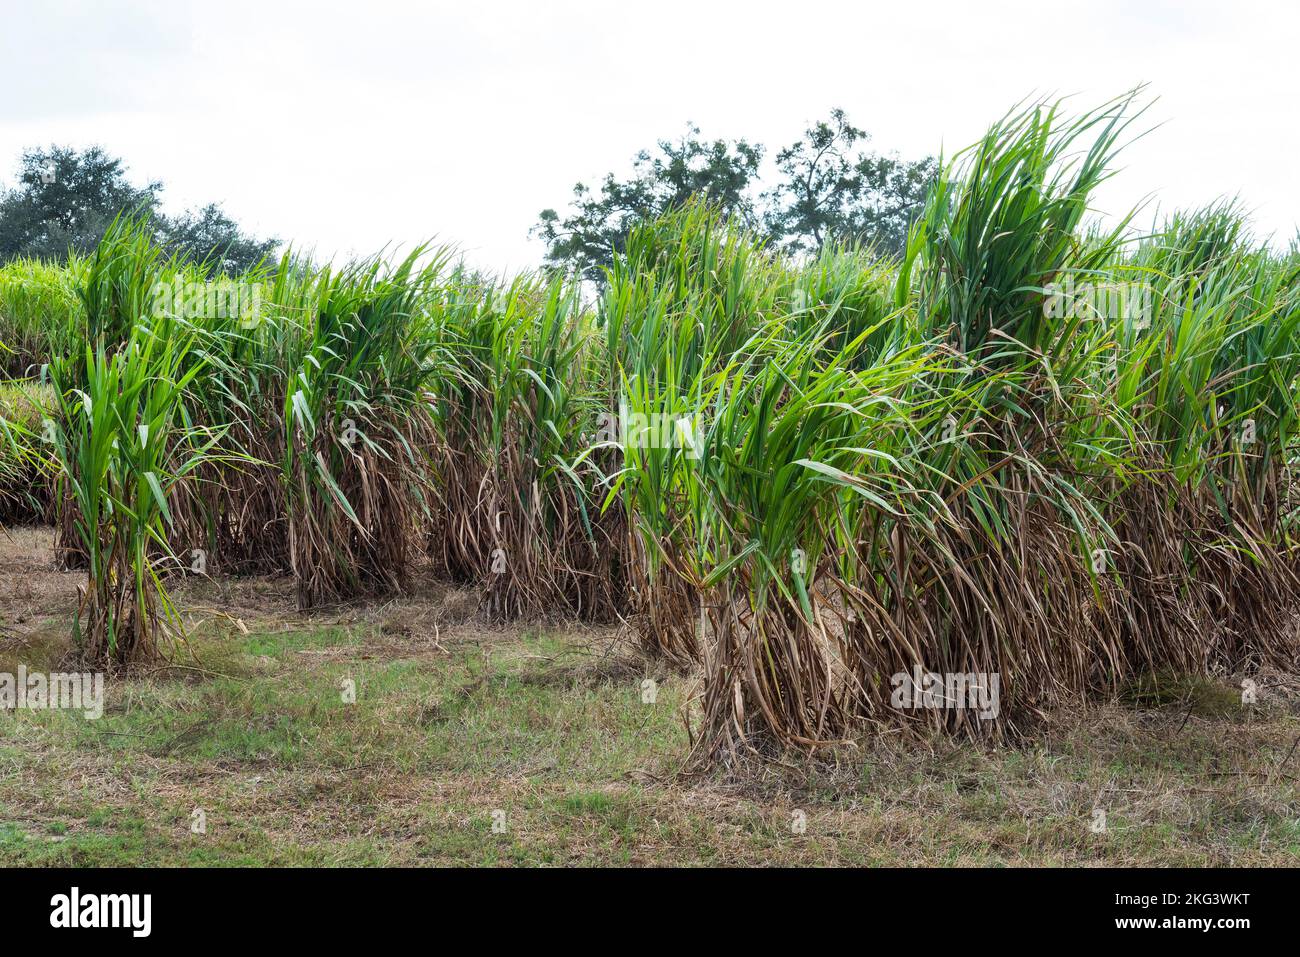 Elephant Grass or Pennesetum Purpureum is growing in North Central Florida as an experimental and renewable source of biomass energy. Stock Photo